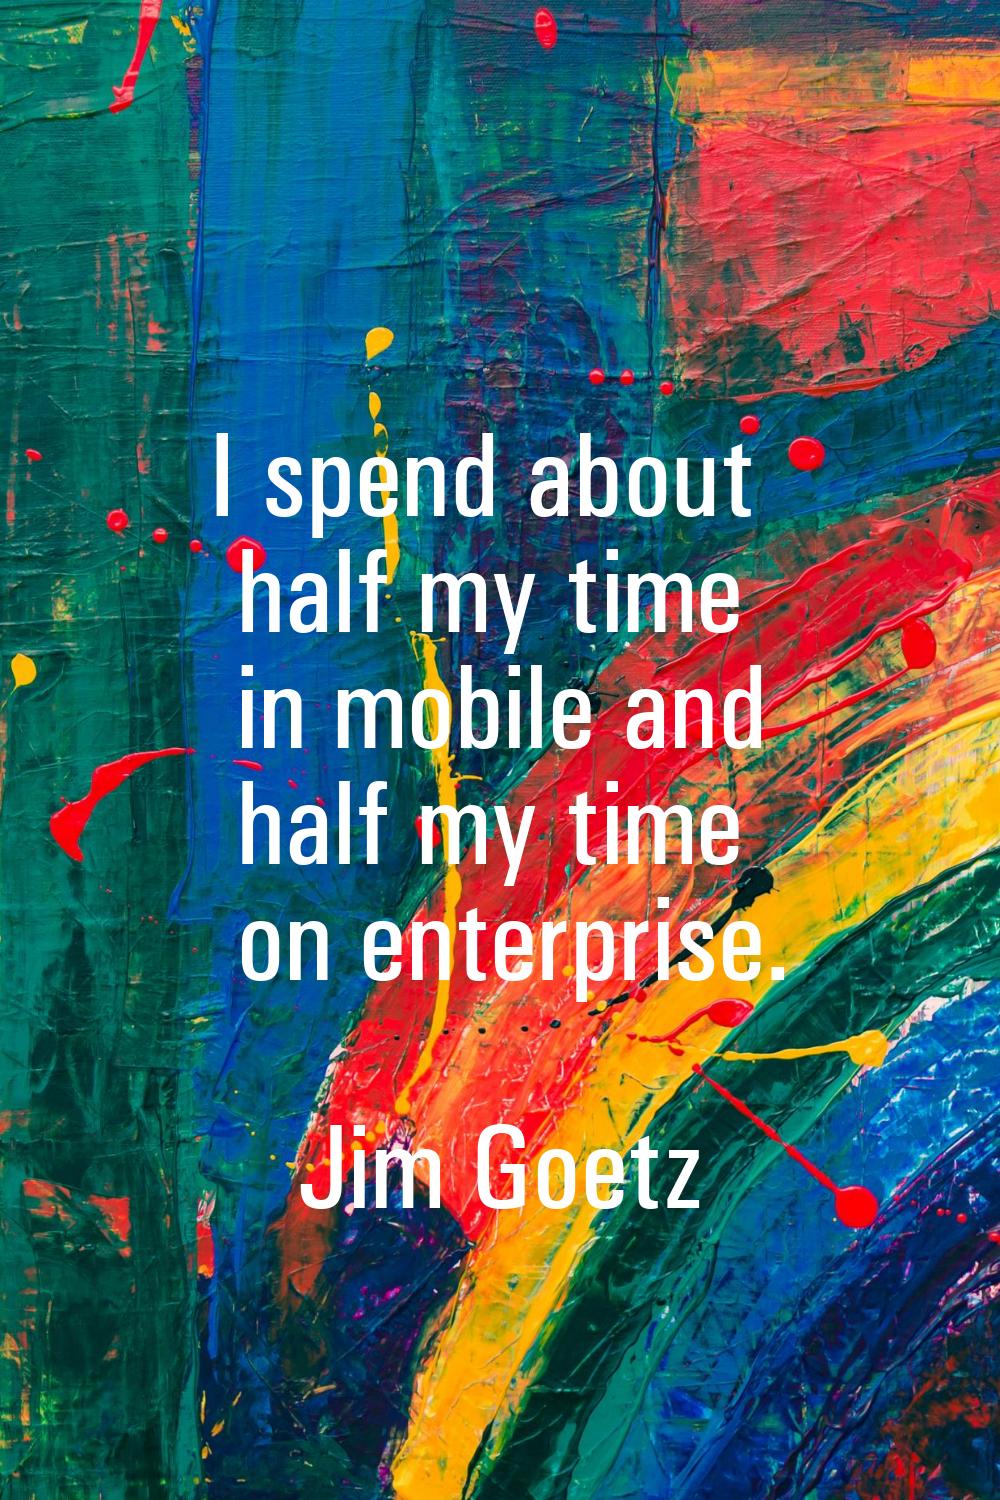 I spend about half my time in mobile and half my time on enterprise.